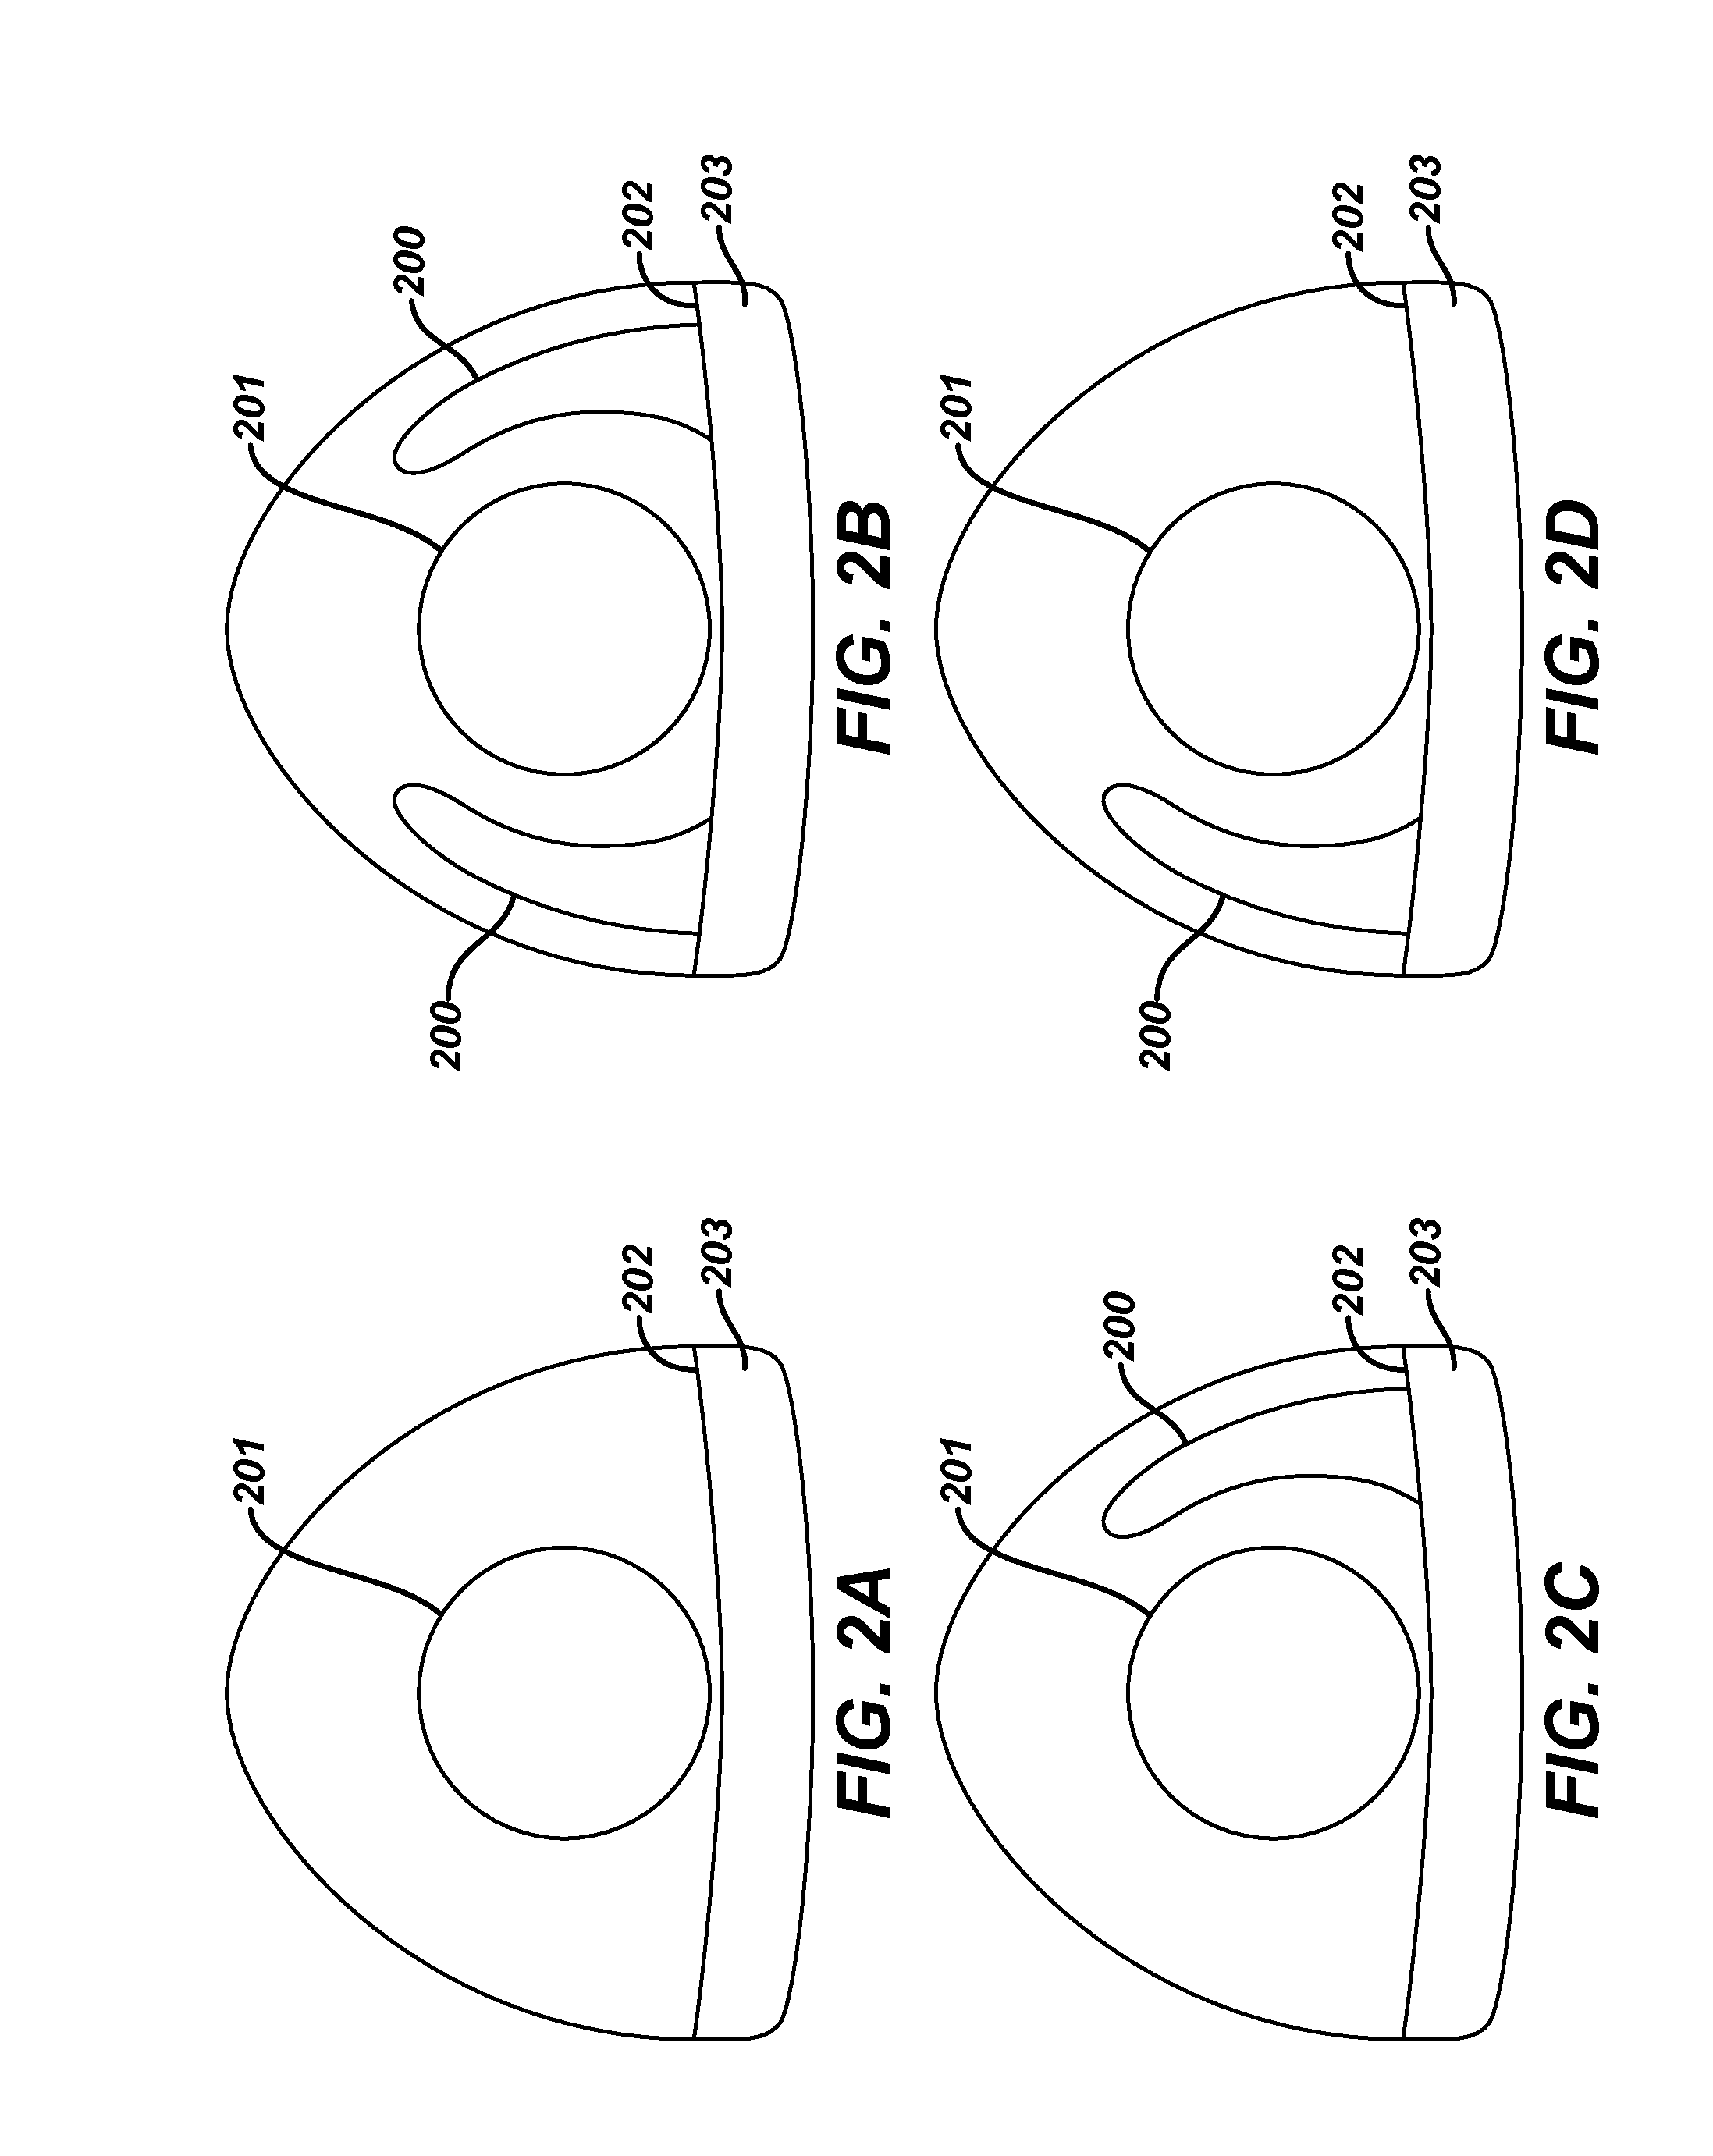 Methods and apparatus for forming a translating multifocal contact lens